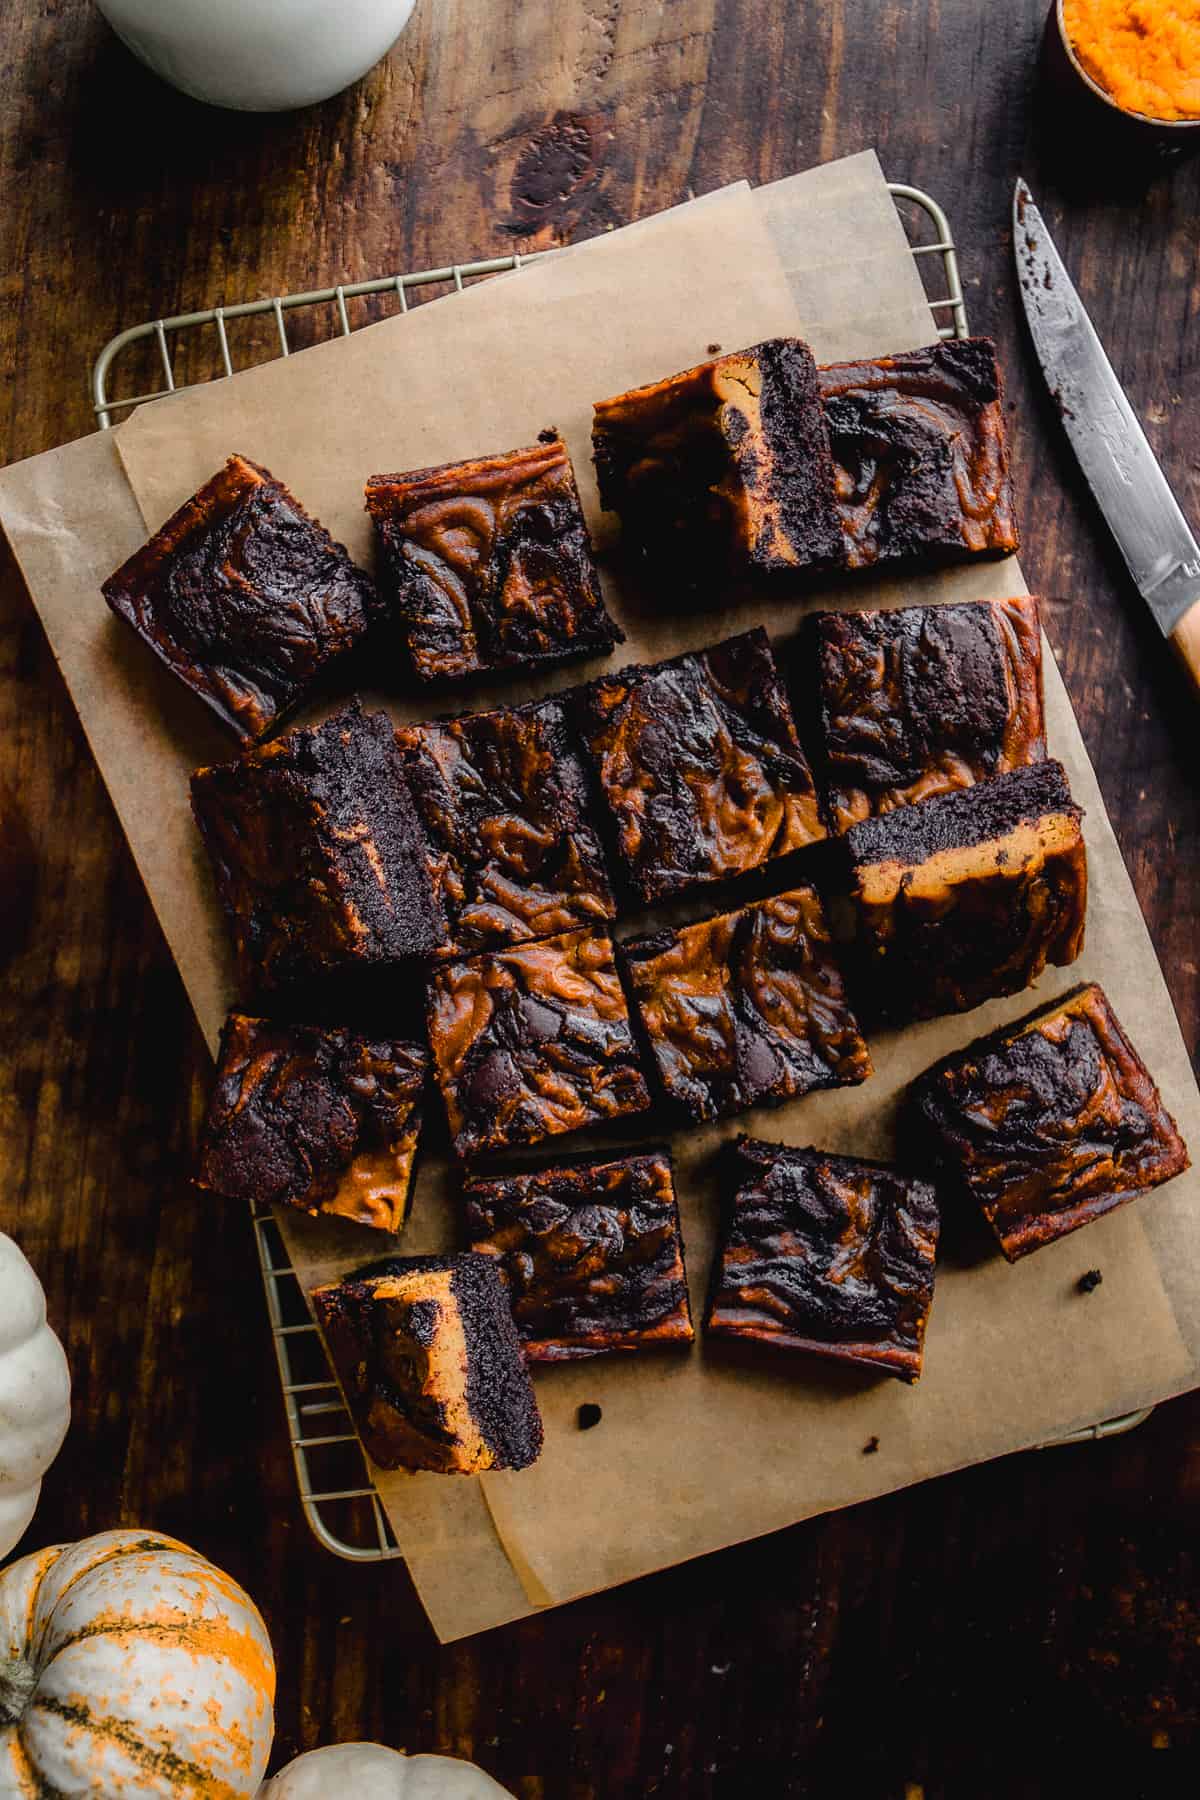 Brownies with pumpkin swirls scattered on brown parchment paper on wooden surface.